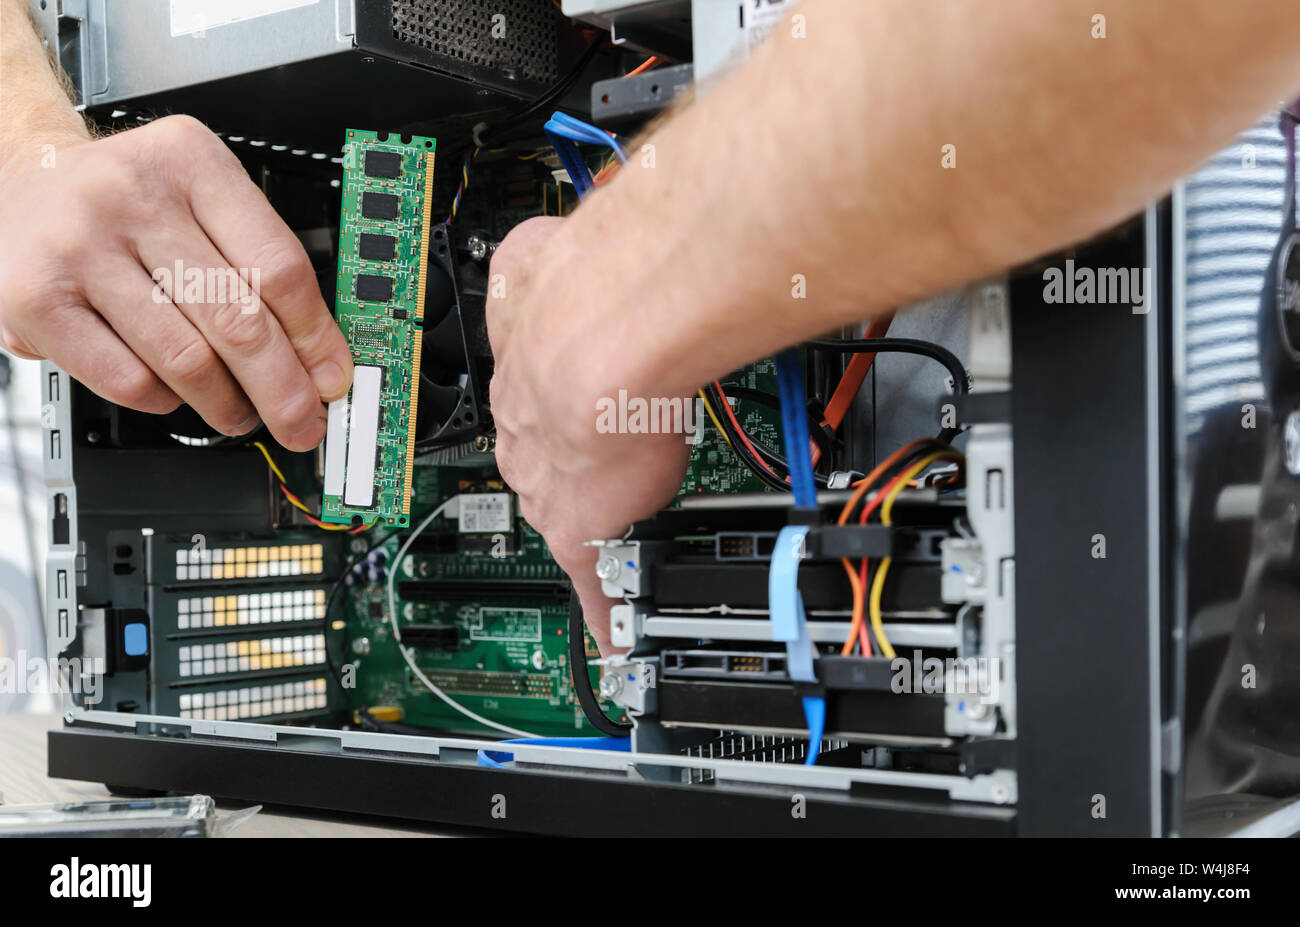 A man is holding a RAM slot to upgrade of the computer. Stock Photo